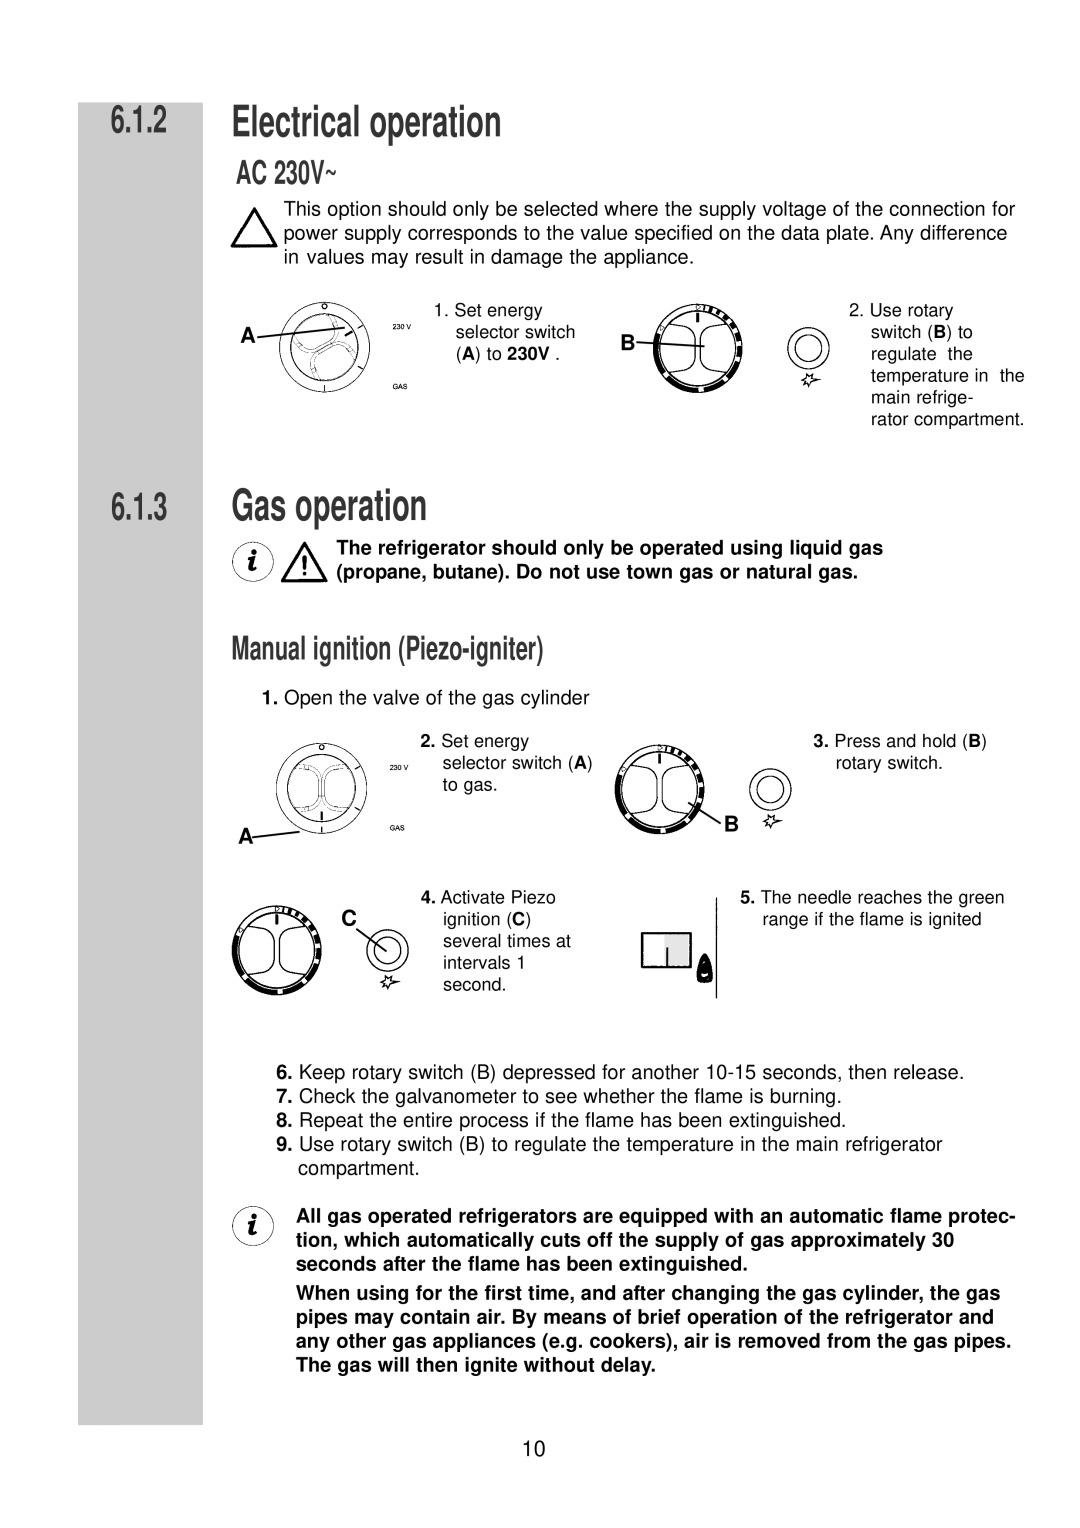 Dometic RGE 2000 installation instructions Electrical operation, Gas operation, AC 230V~, Manual ignition Piezo-igniter 